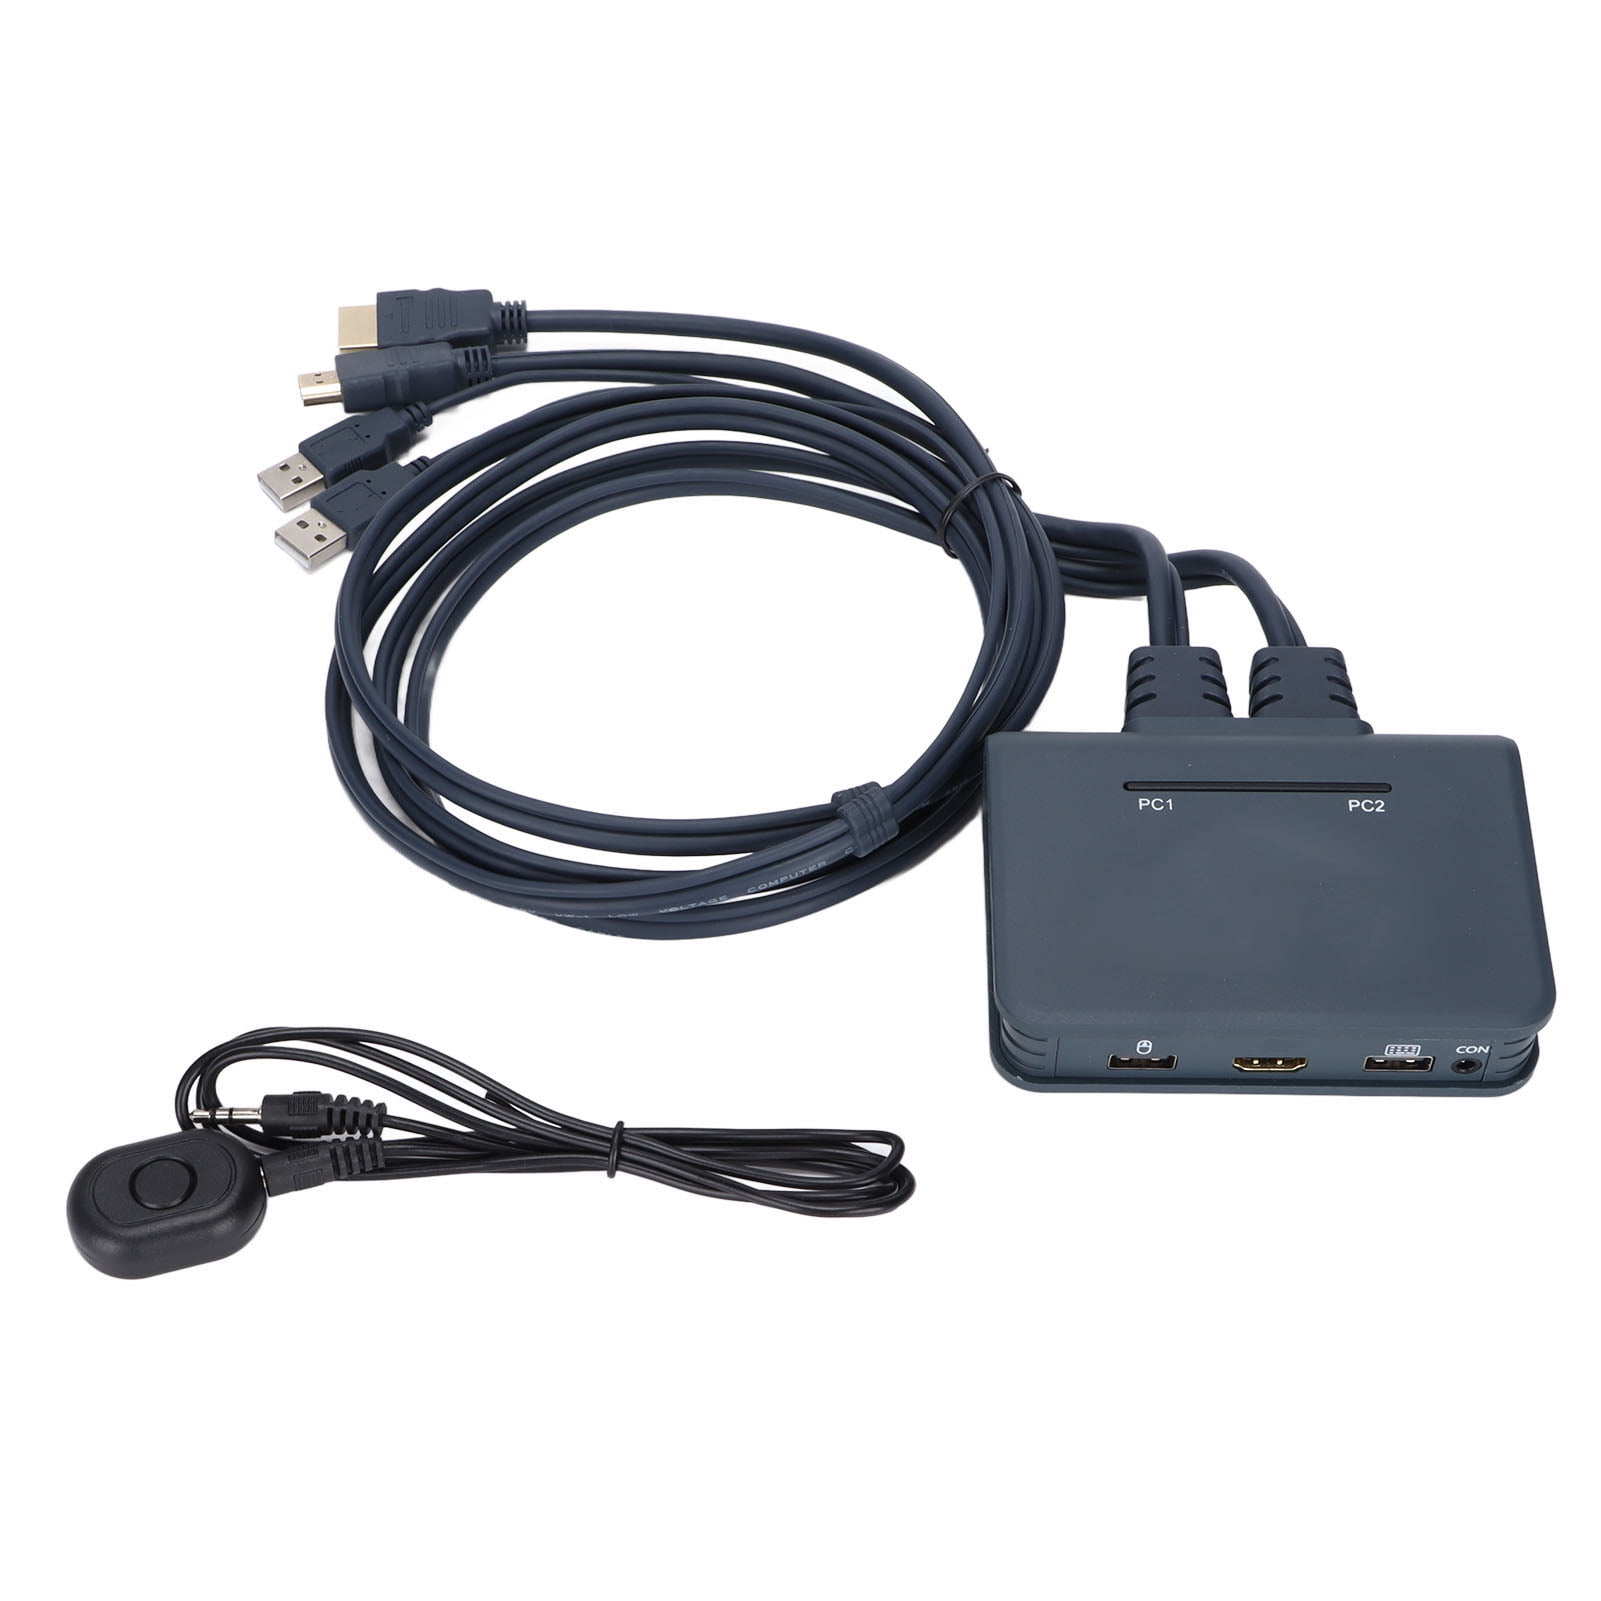 2 Ports USB KVM Switch, Practical Simple To Install KVM Switch Compatibility For Home Entertainment For Office -